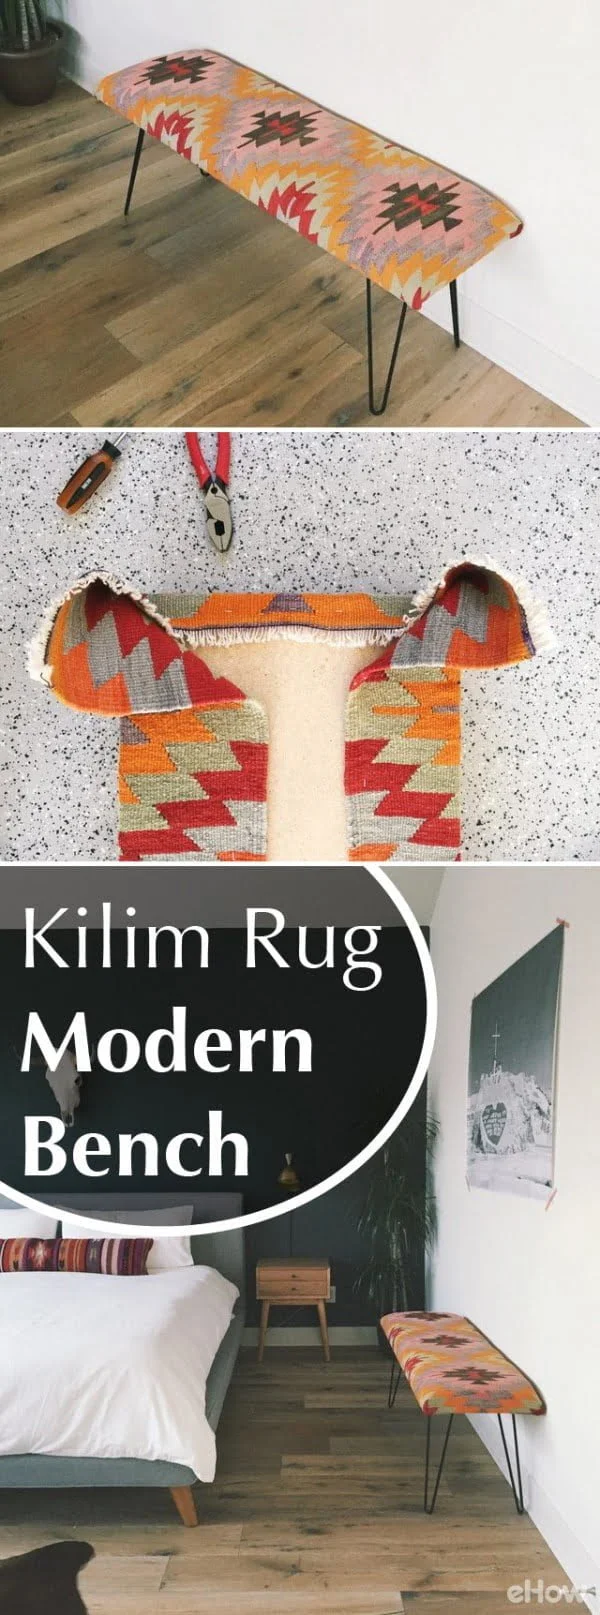 Check out the tutorial on how to make a DIY kilim rug bench